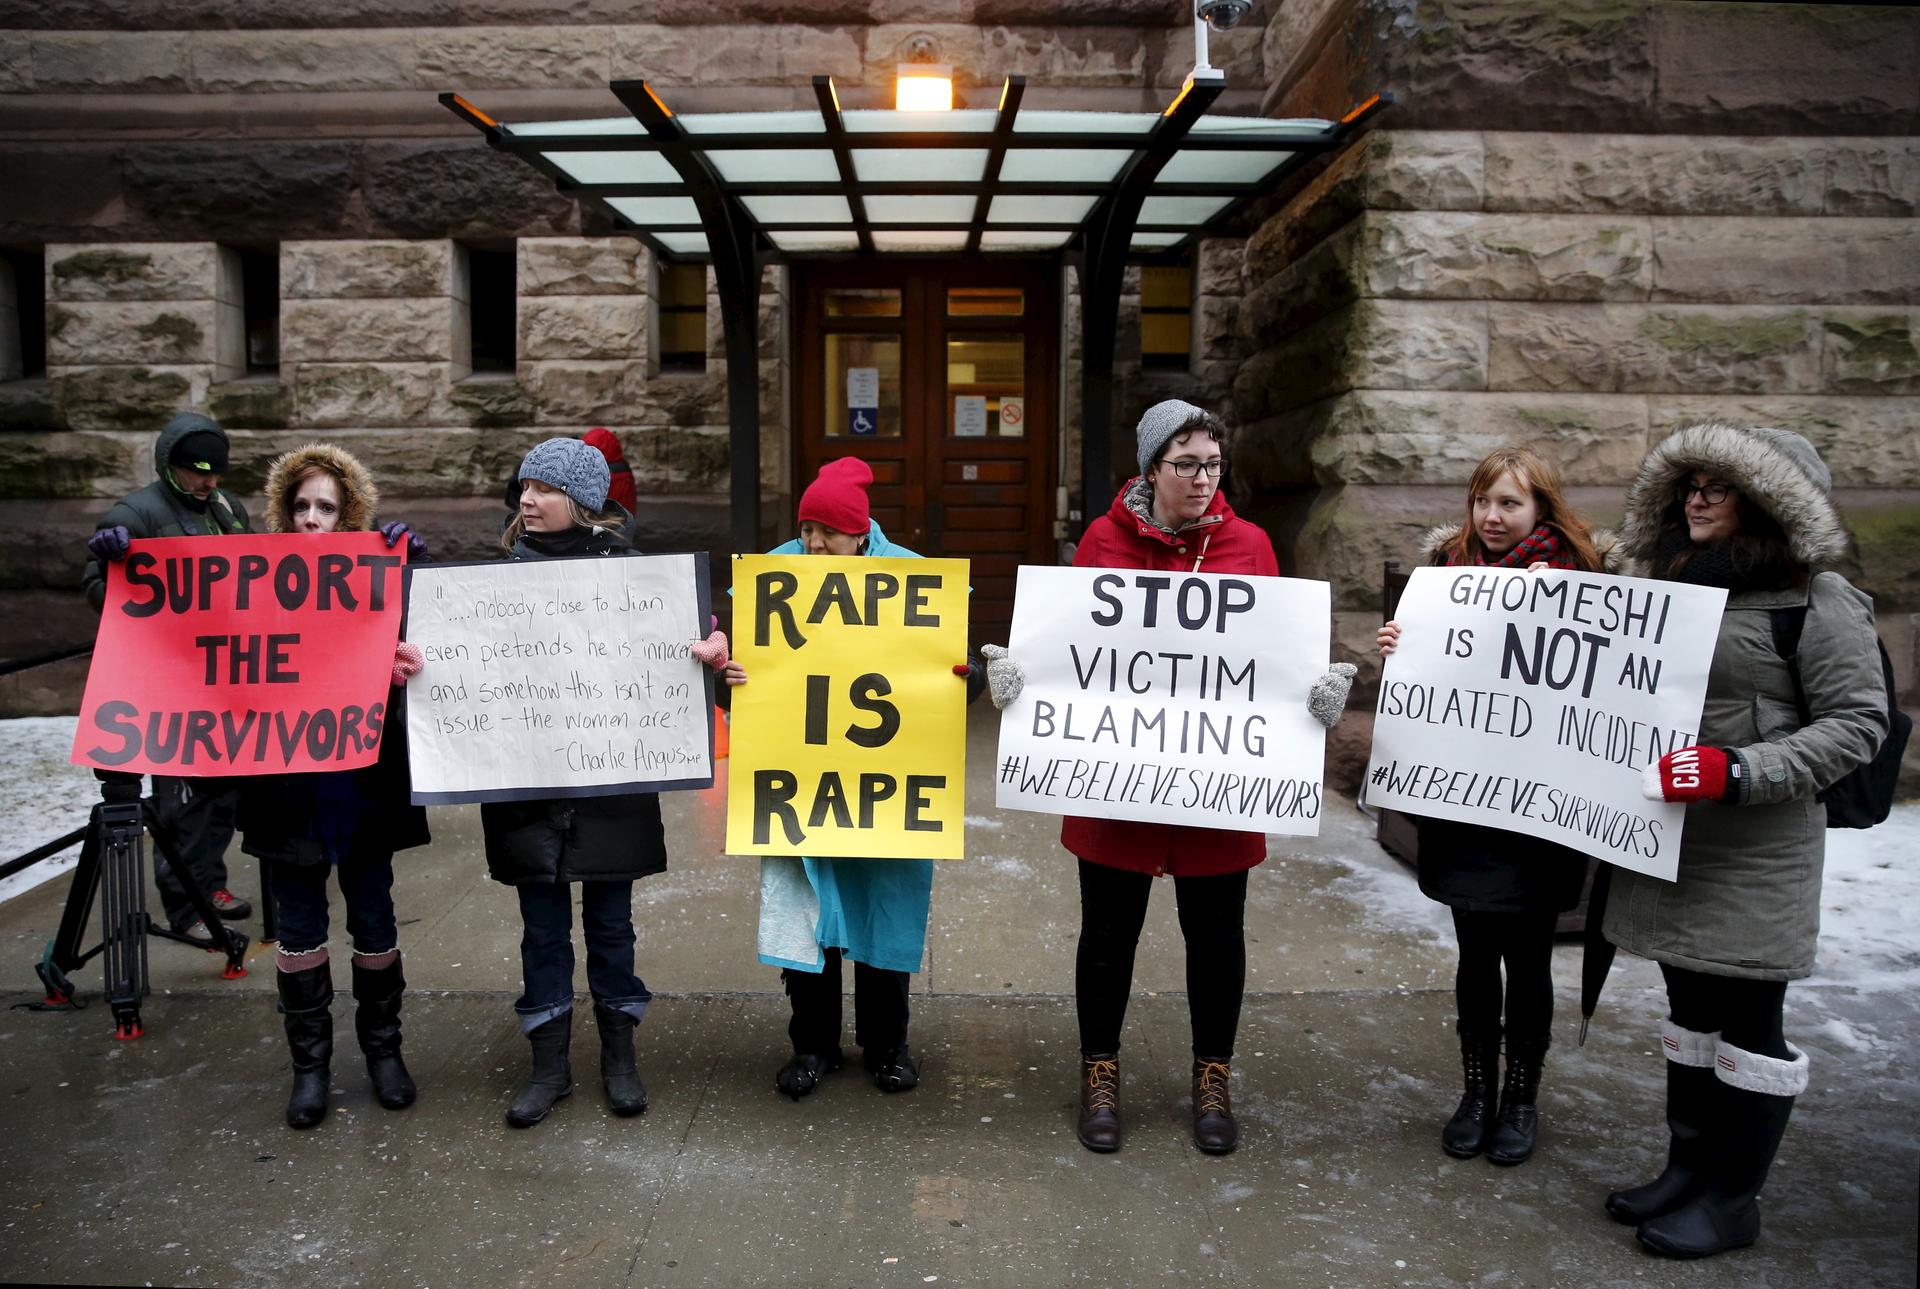 Protesters stand outside of the courthouse before an Ontario judge found former Canadian radio host Jian Ghomeshi not guilty on four sexual assault charges and one count of choking.